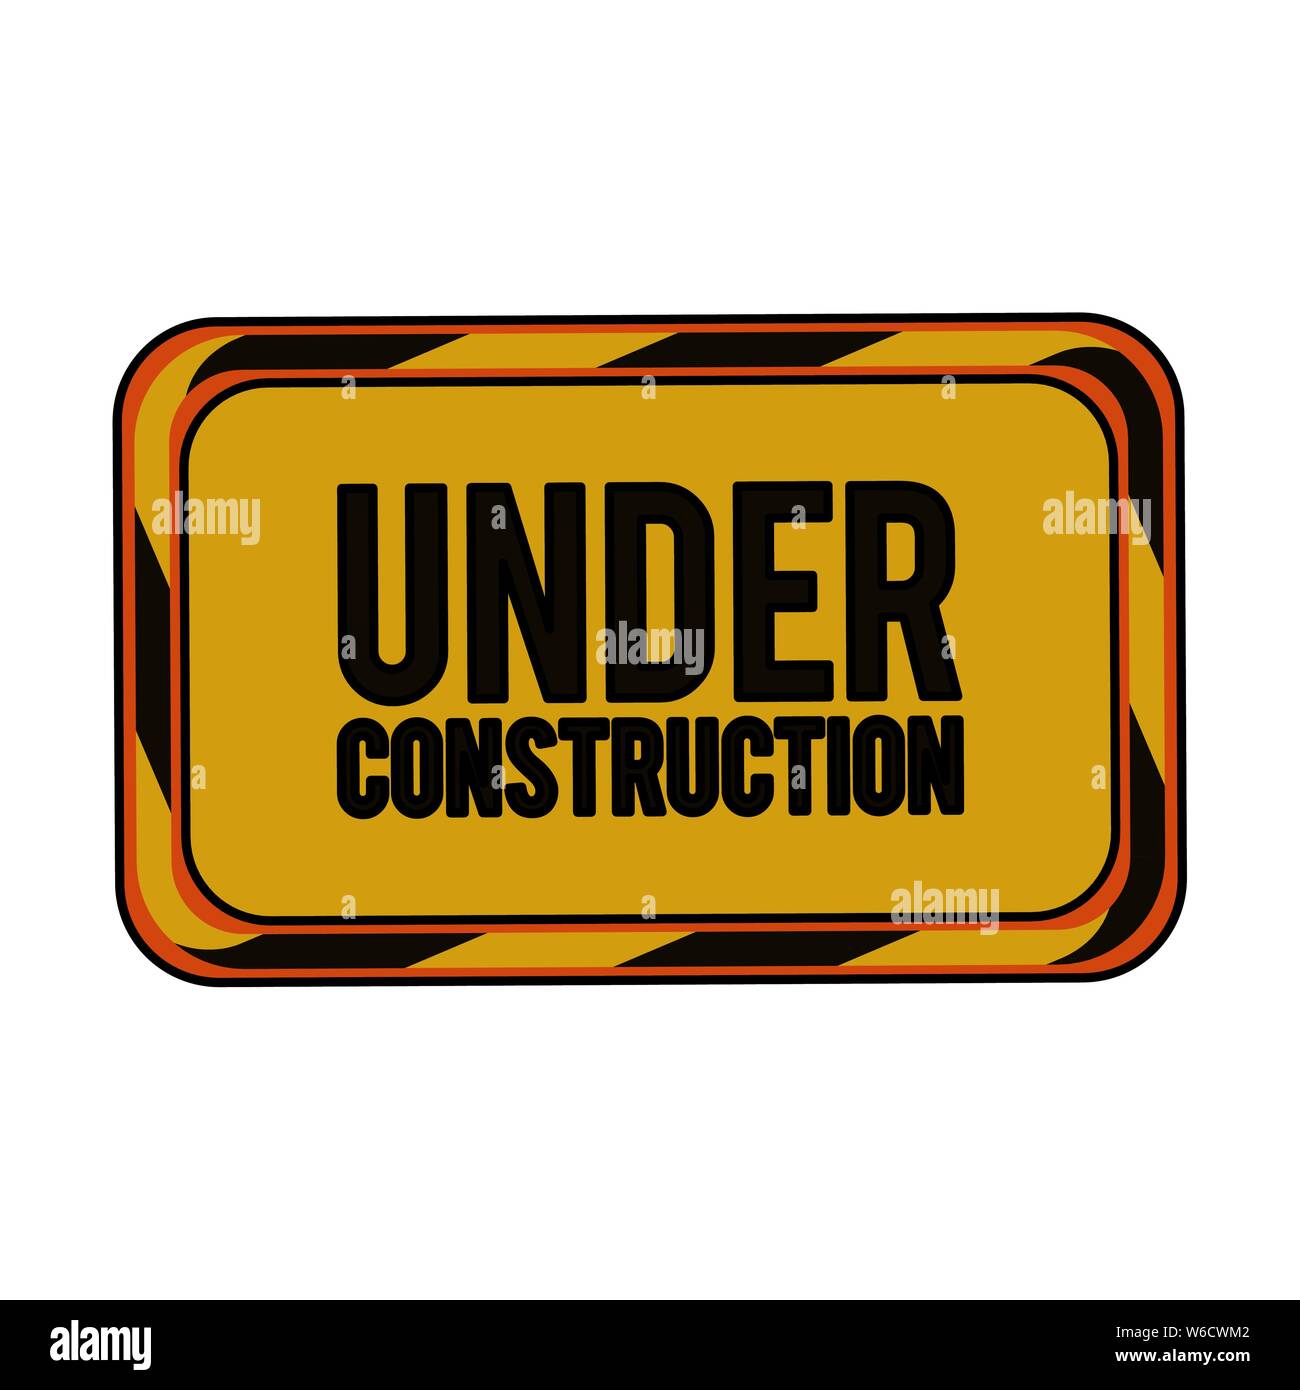 construction architectural engineering work cartoon Stock Vector Image ...